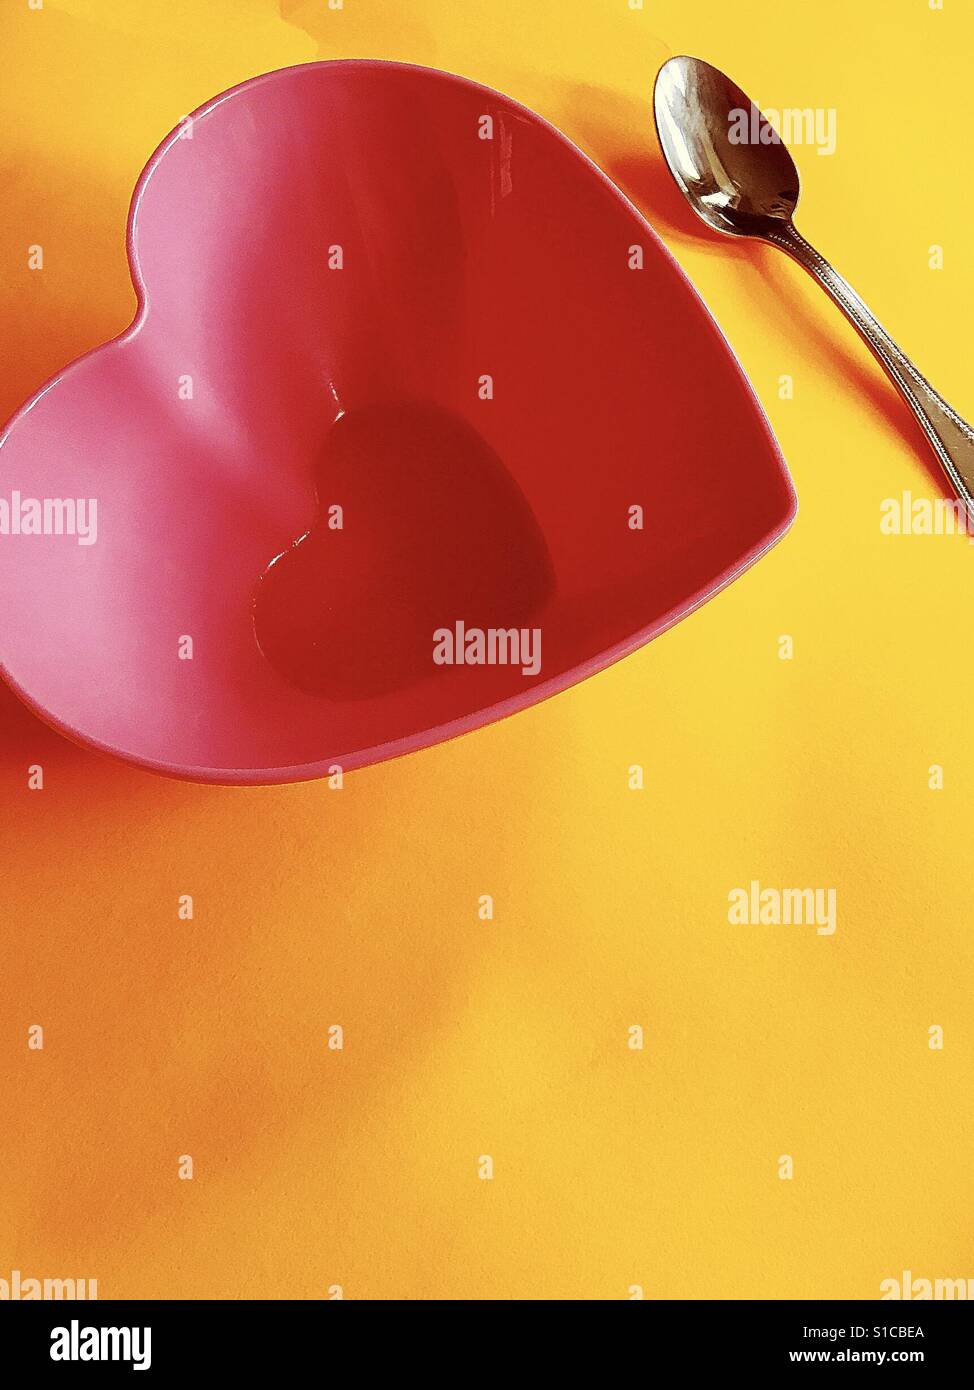 Heart Shaped Bowl with Spoon Stock Photo